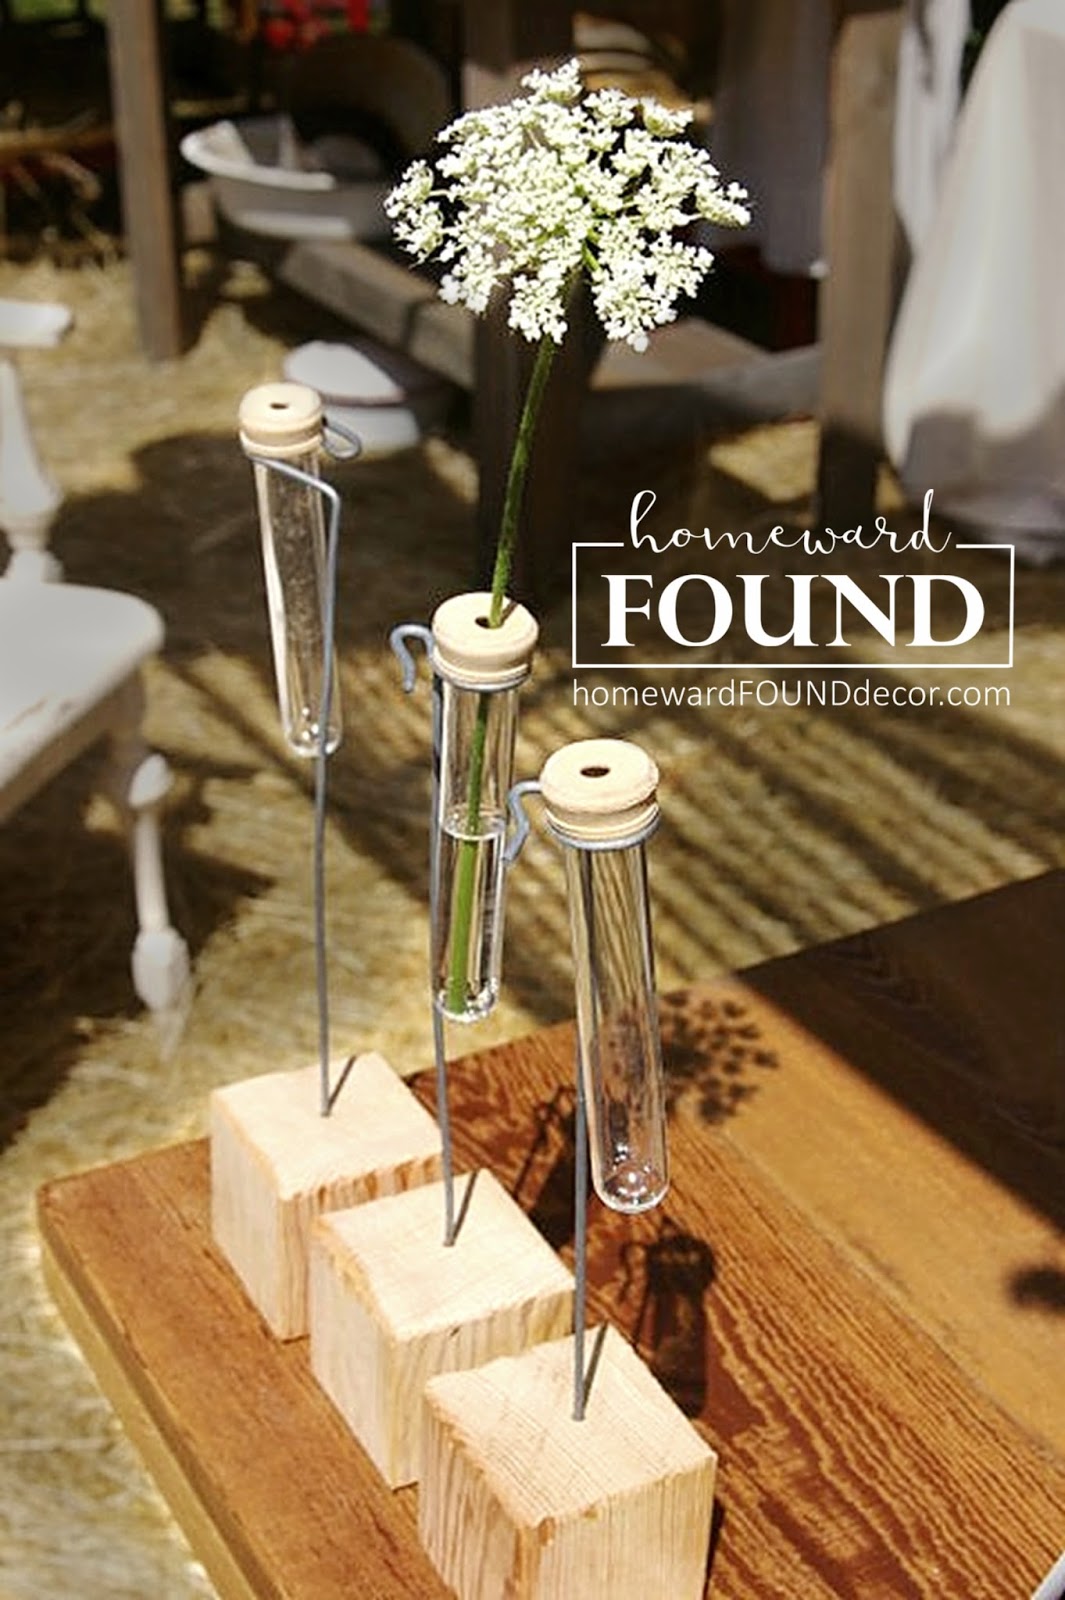 Test tube flower vase DIY, to use as party centerpiece - With Love